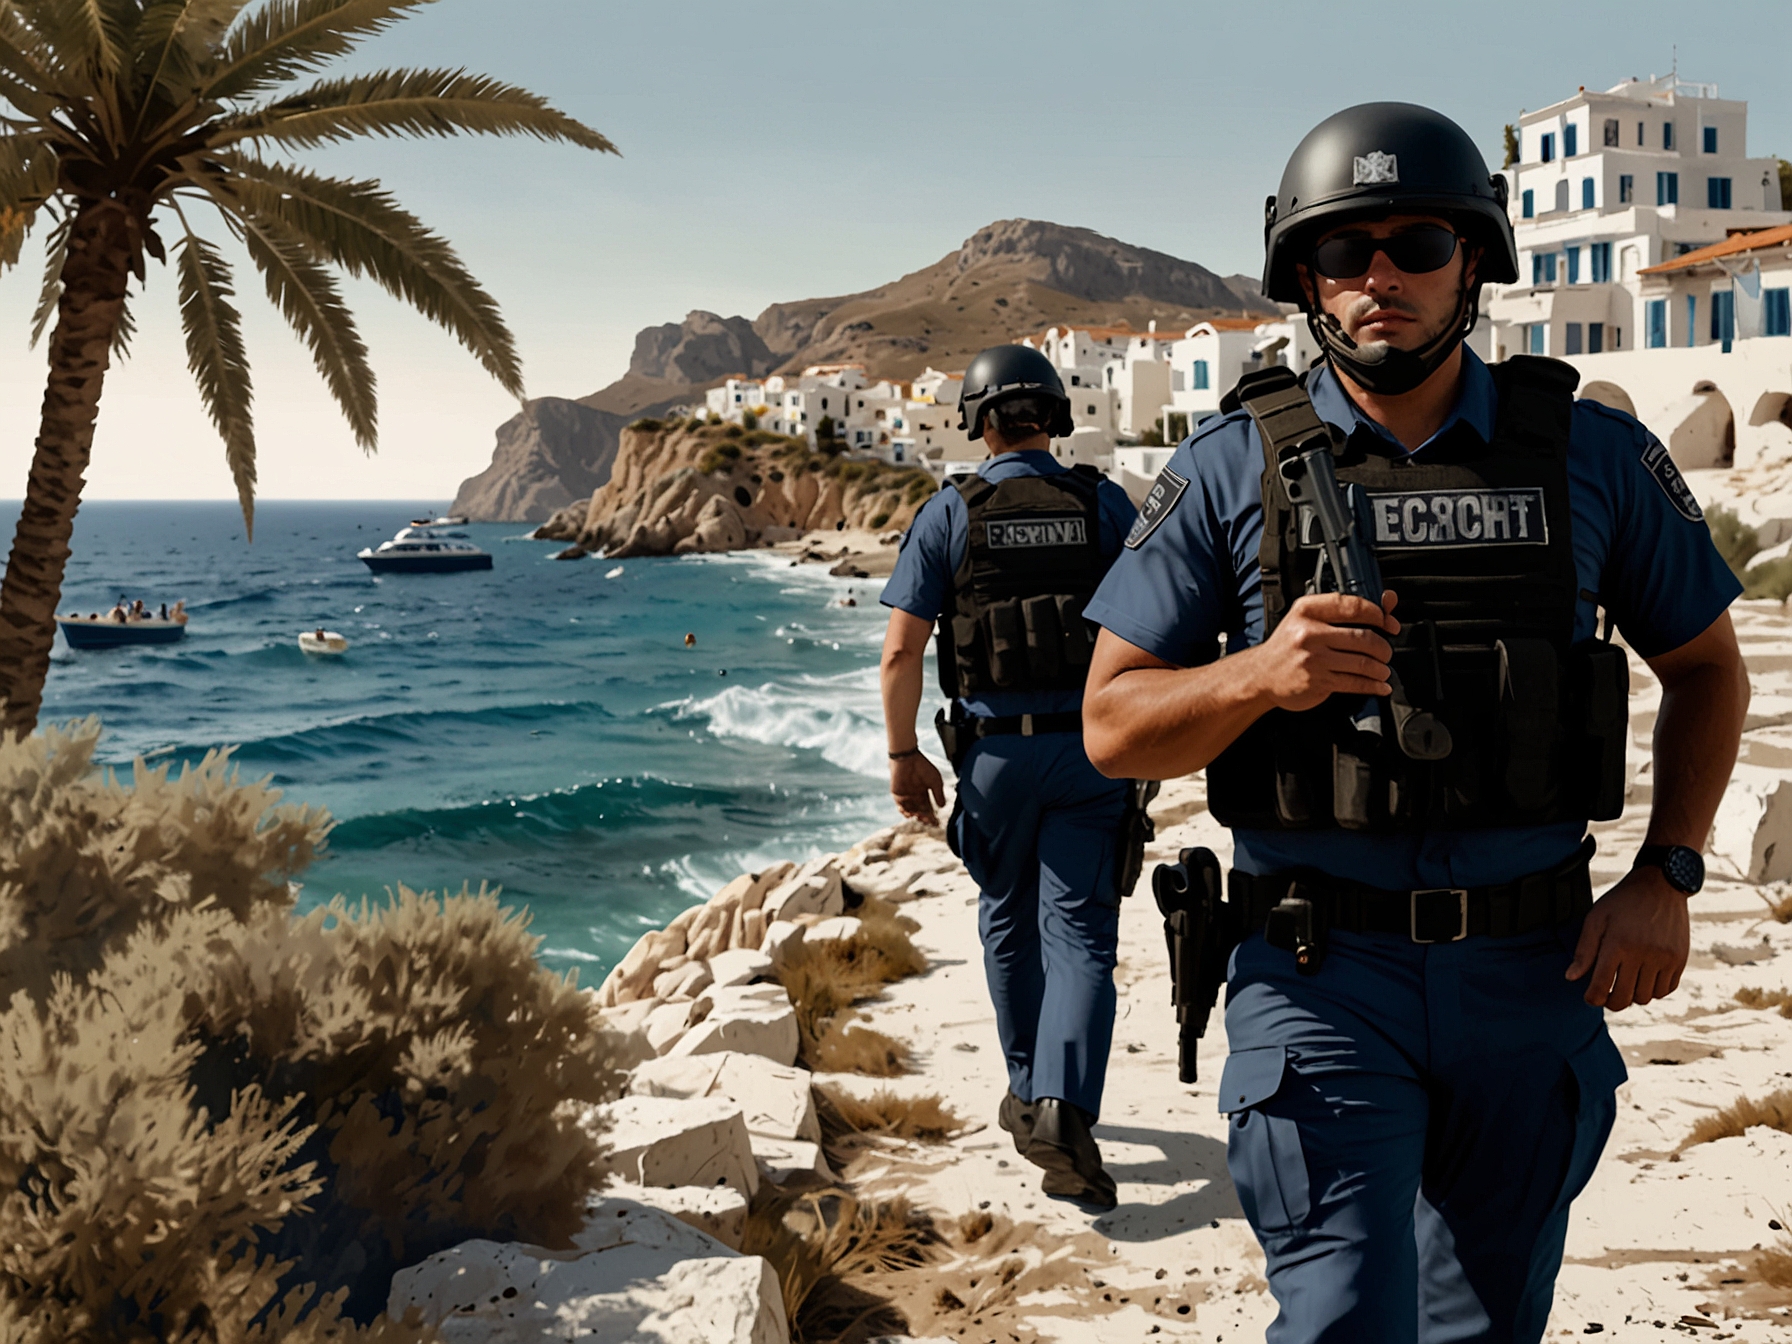 Local law enforcement patrolling a Greek island's coastline, emphasizing the increased security measures being put in place to ensure safety for tourists amid recent incidents.